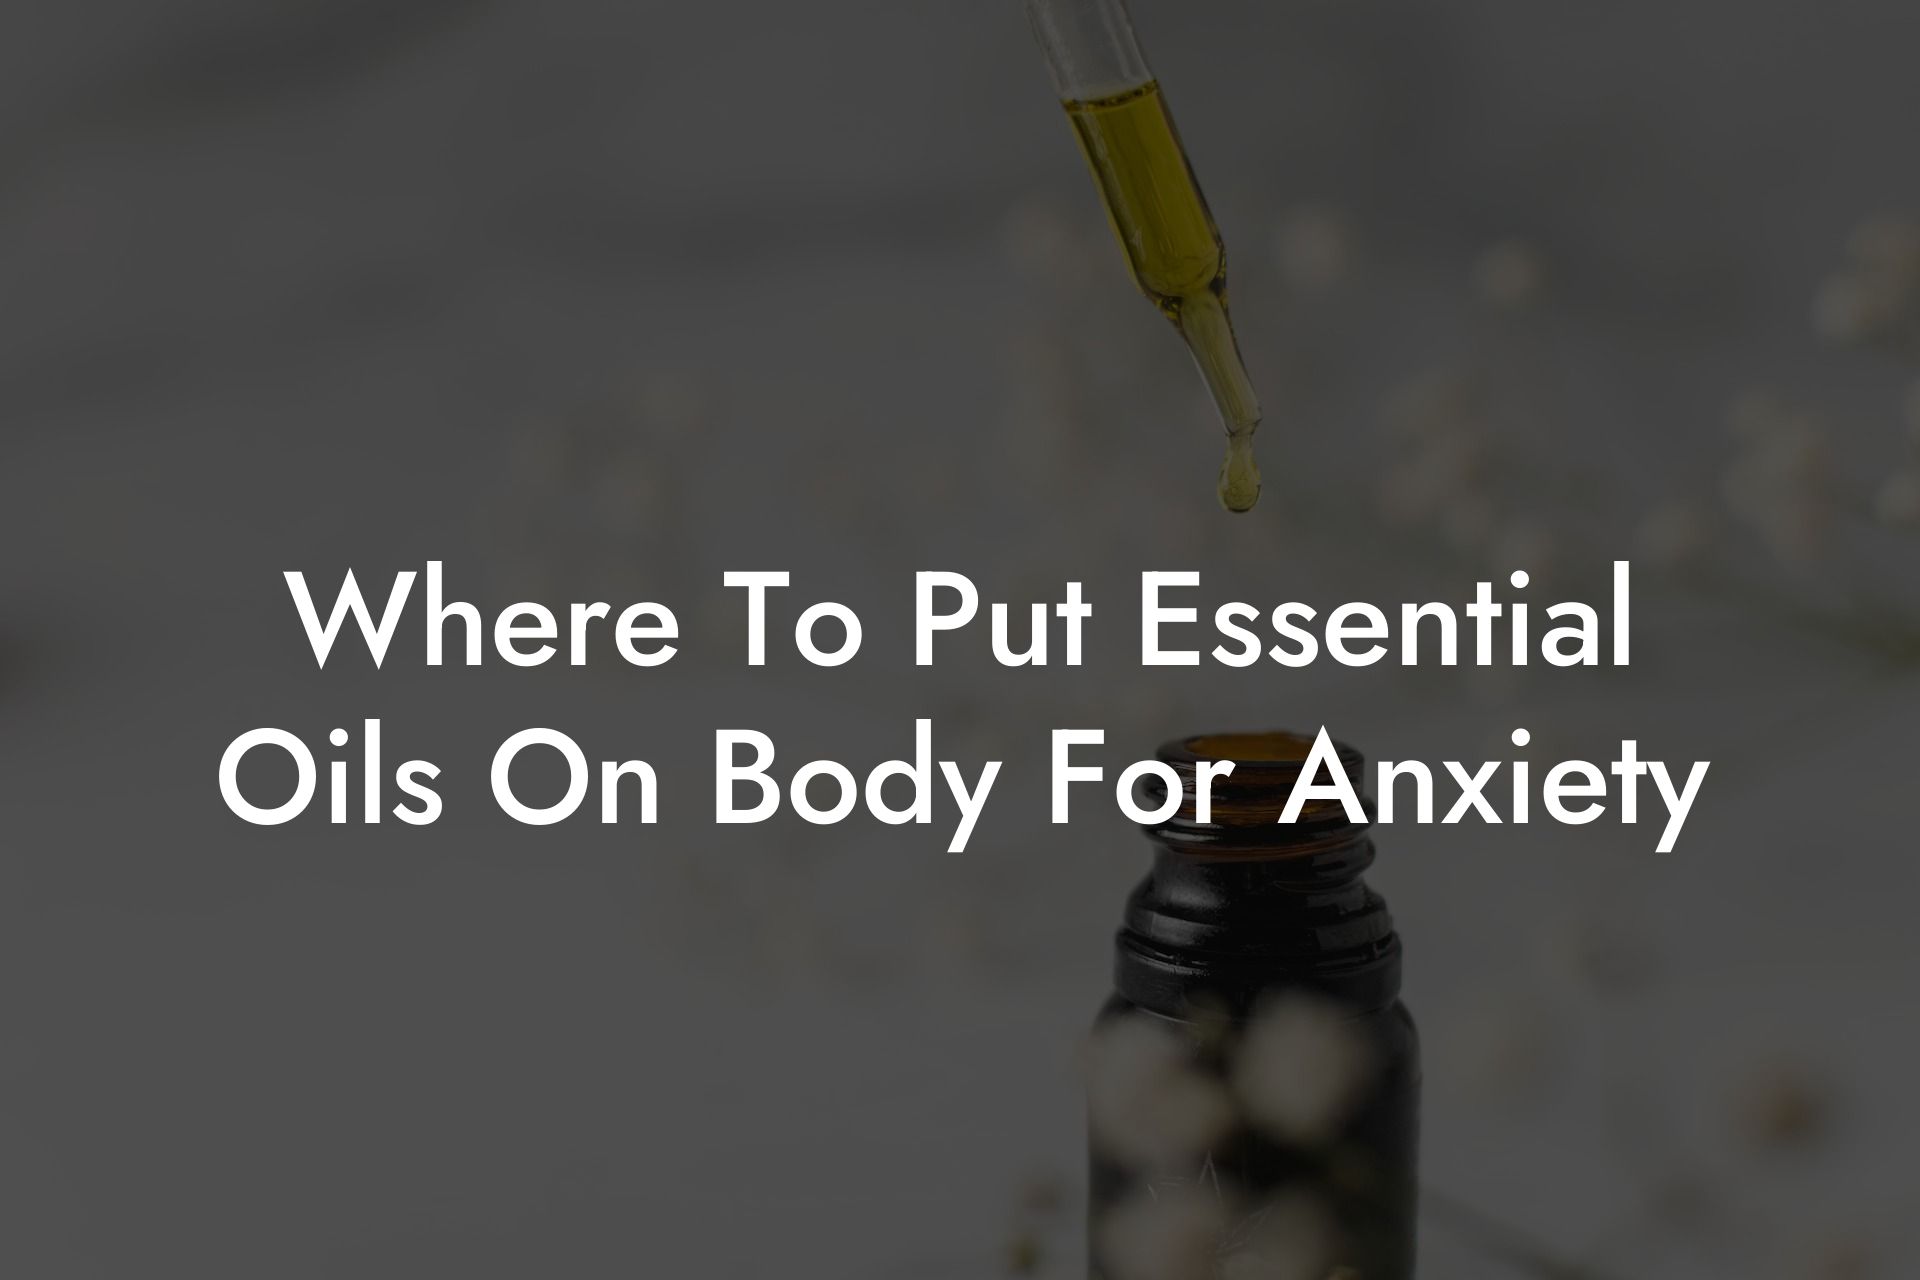 Where To Put Essential Oils On Body For Anxiety